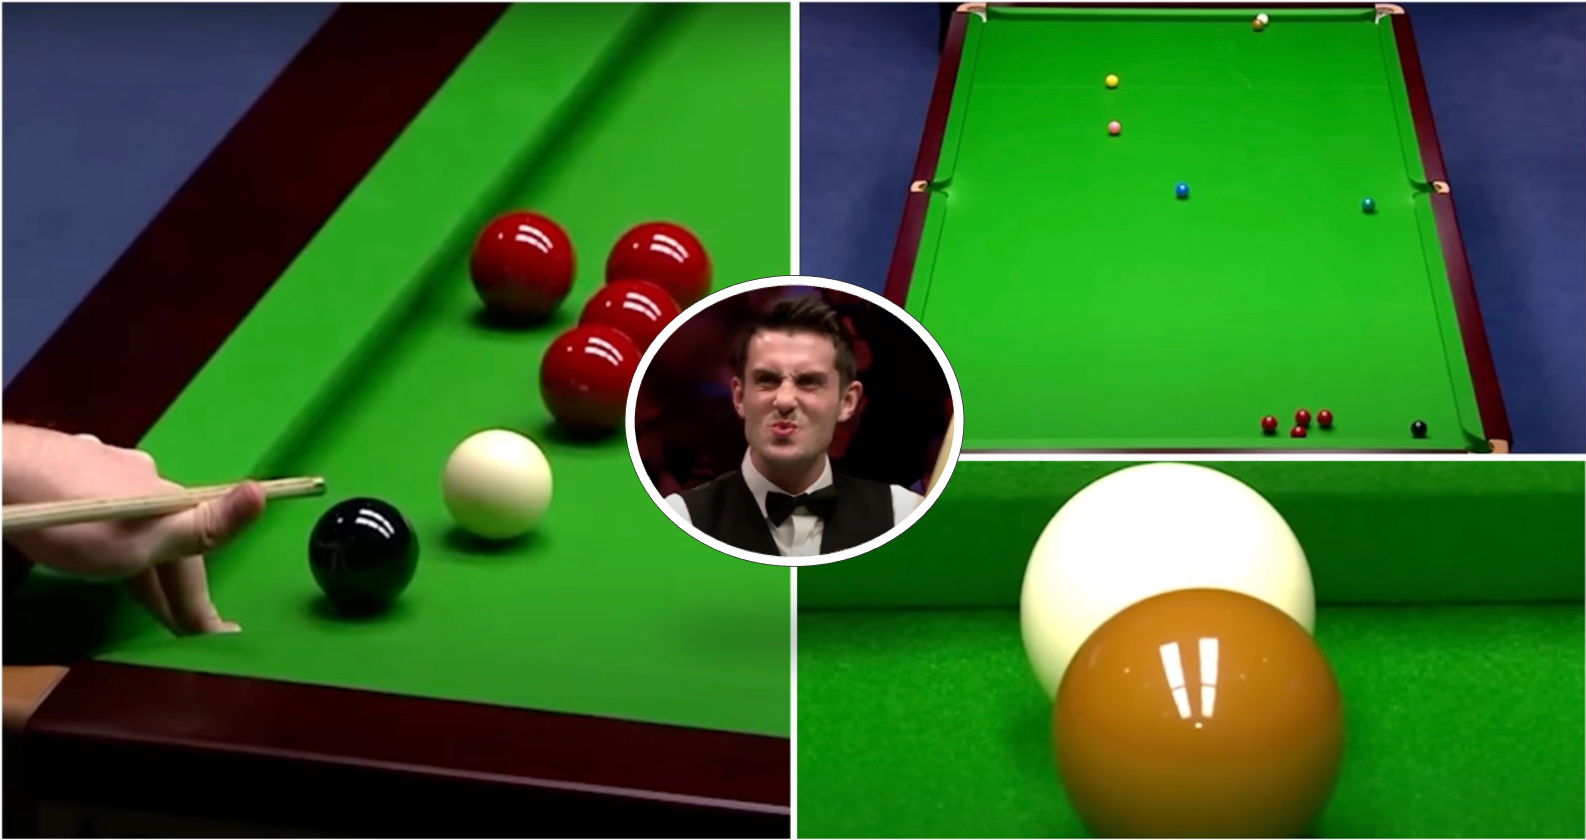 Snooker shot of the decade? Ricky Waldens ridiculous snooker against Mark Selby